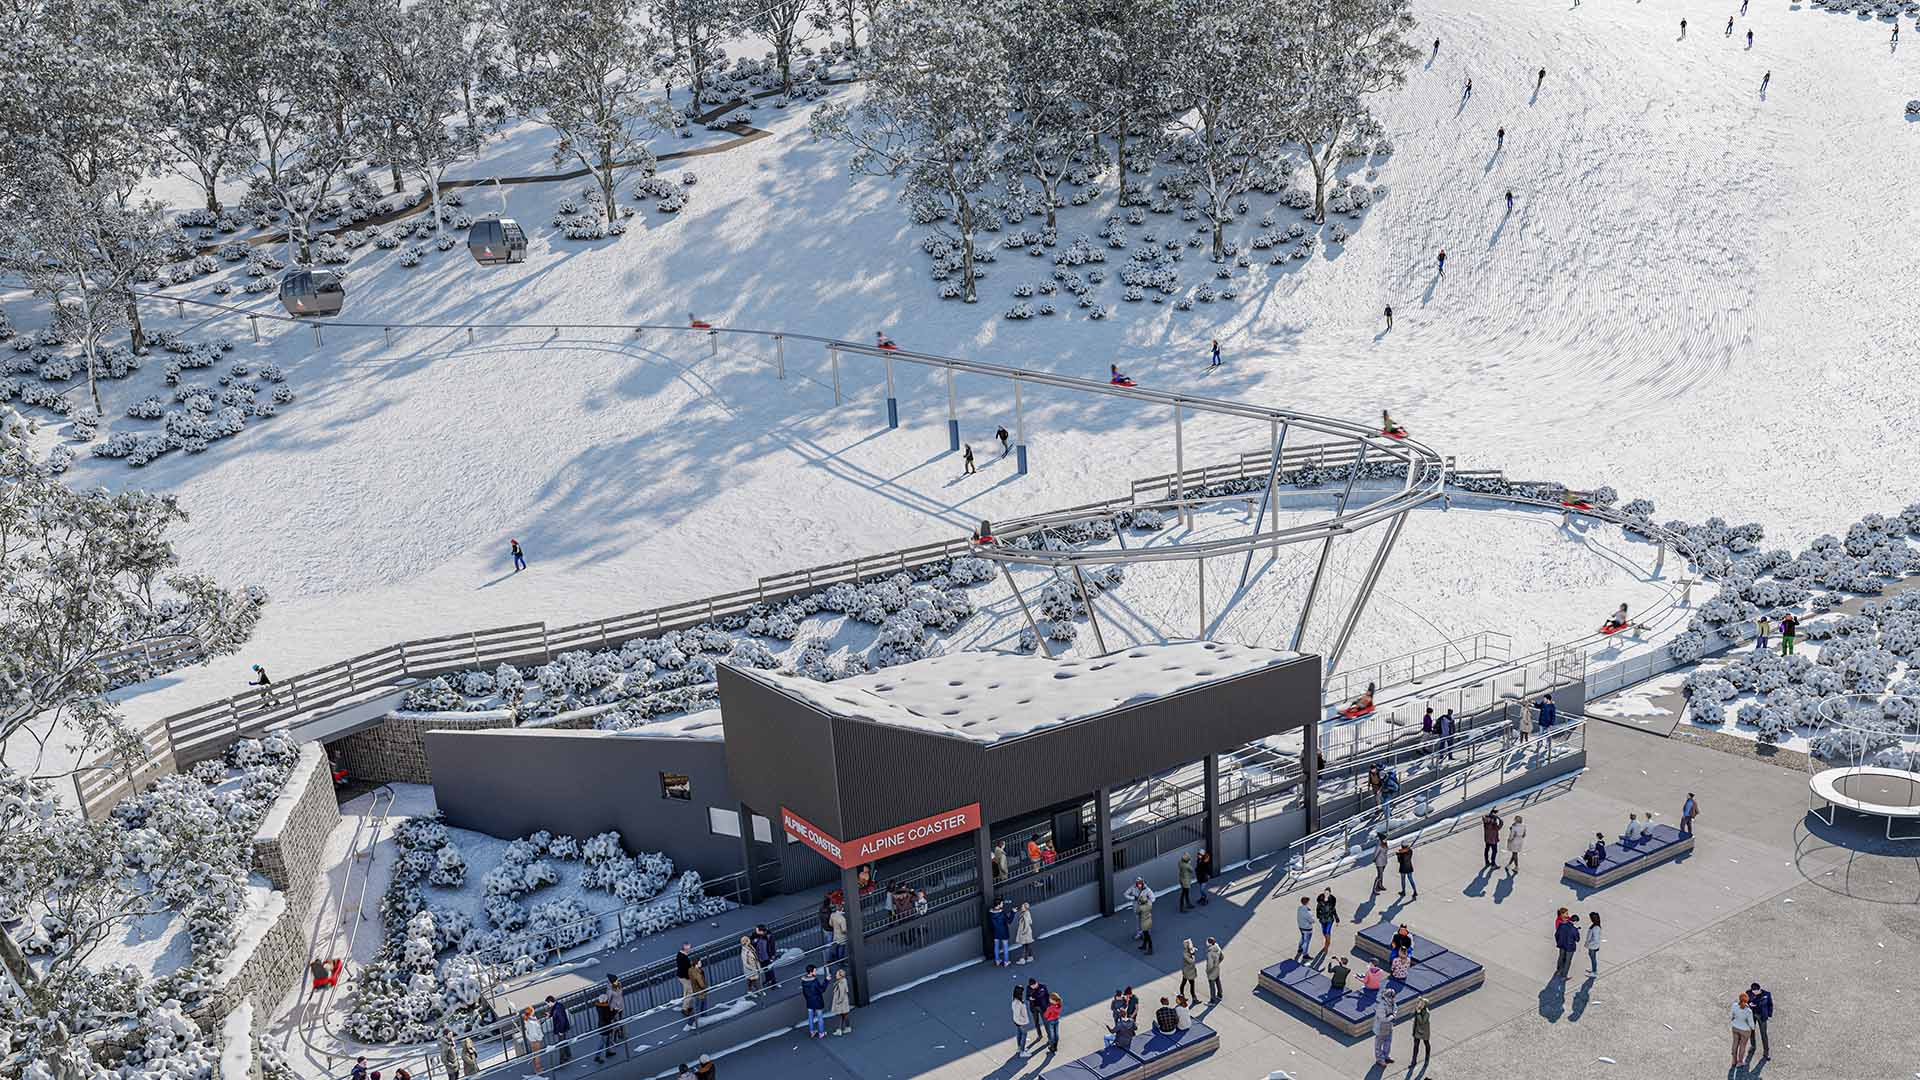 Coming Soon: Thredbo Is About to Become Home to the First Alpine Coaster in the Southern Hemisphere